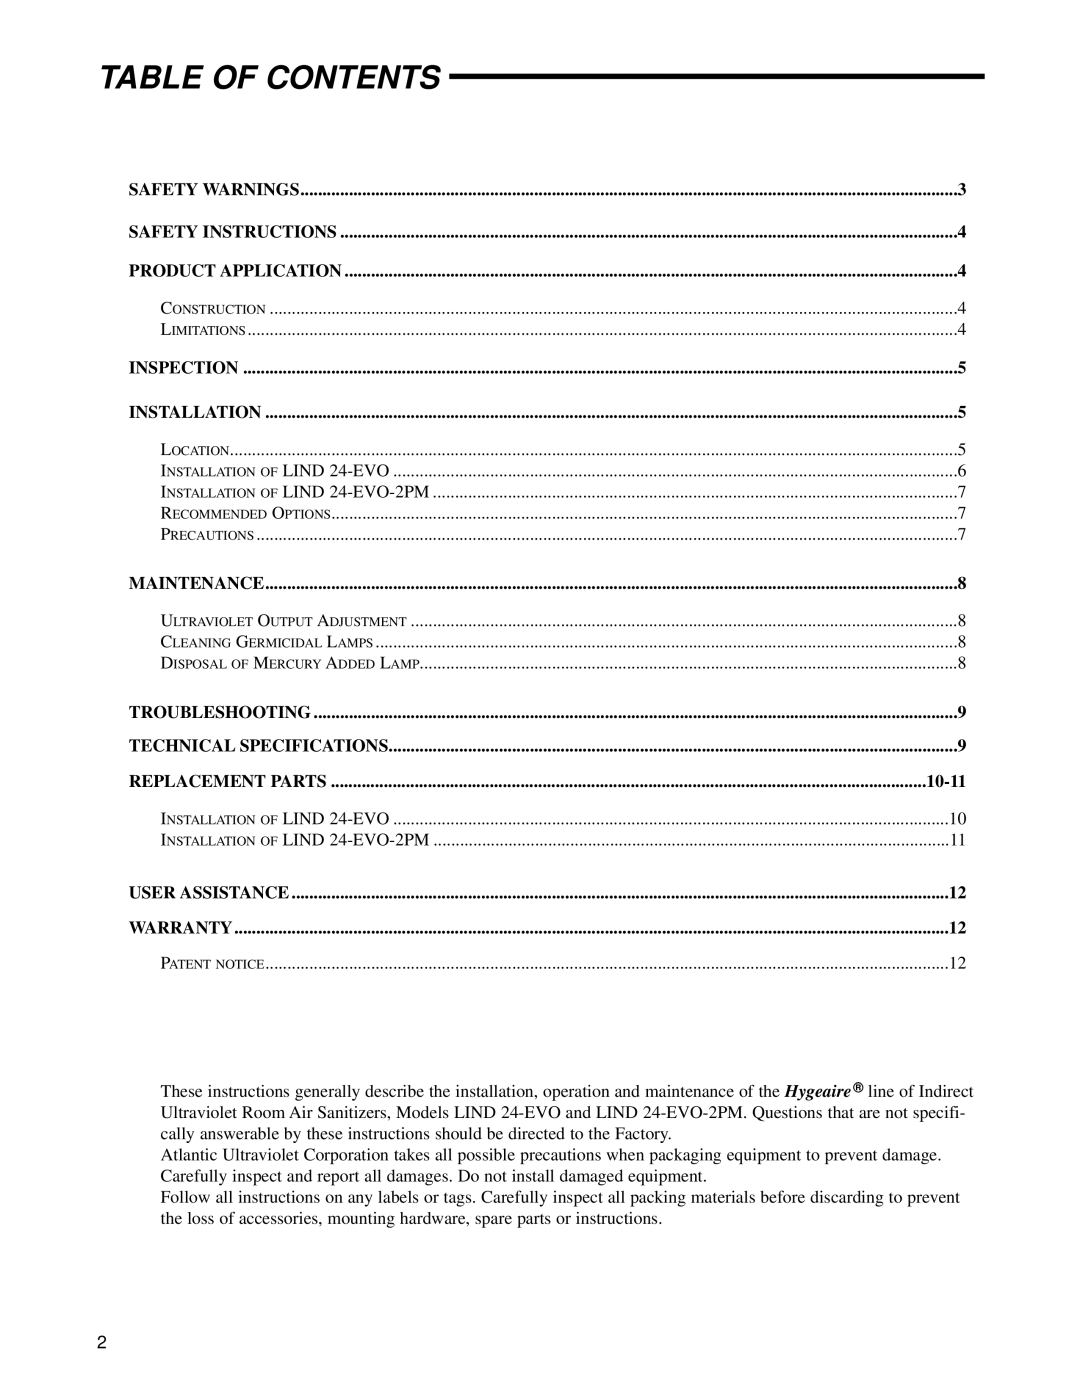 UltraViolet Devices Air Disinfection manual Table Of Contents 